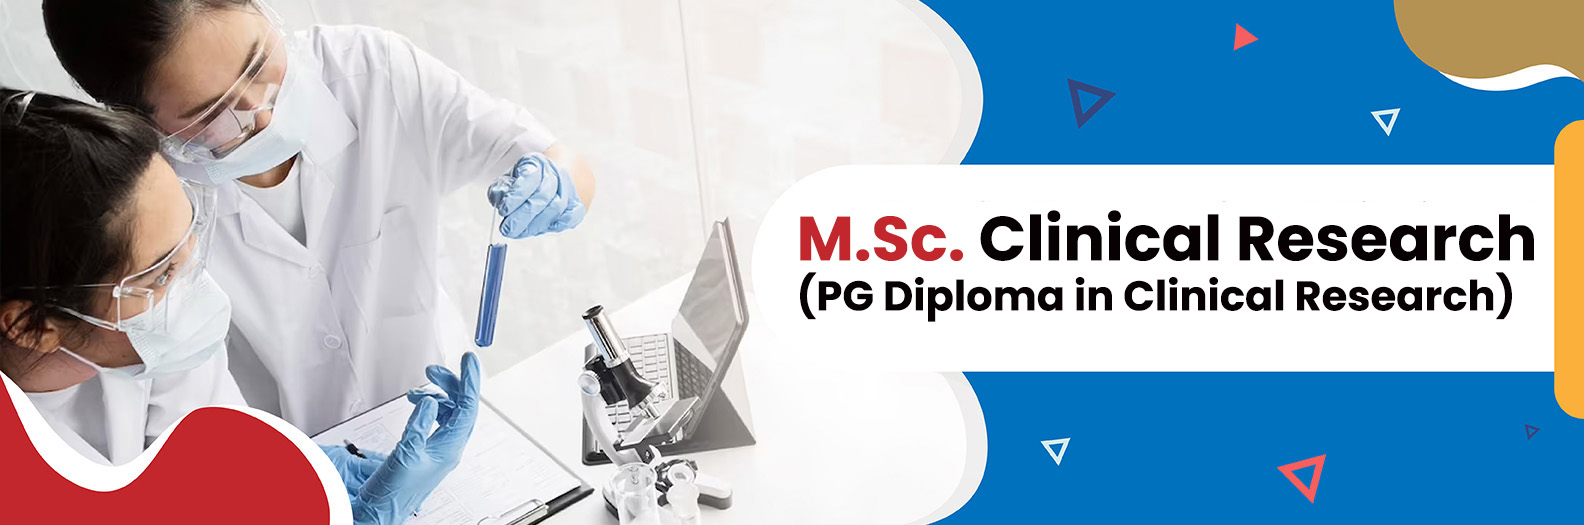 pg-diploma-in-clinical-resaerch